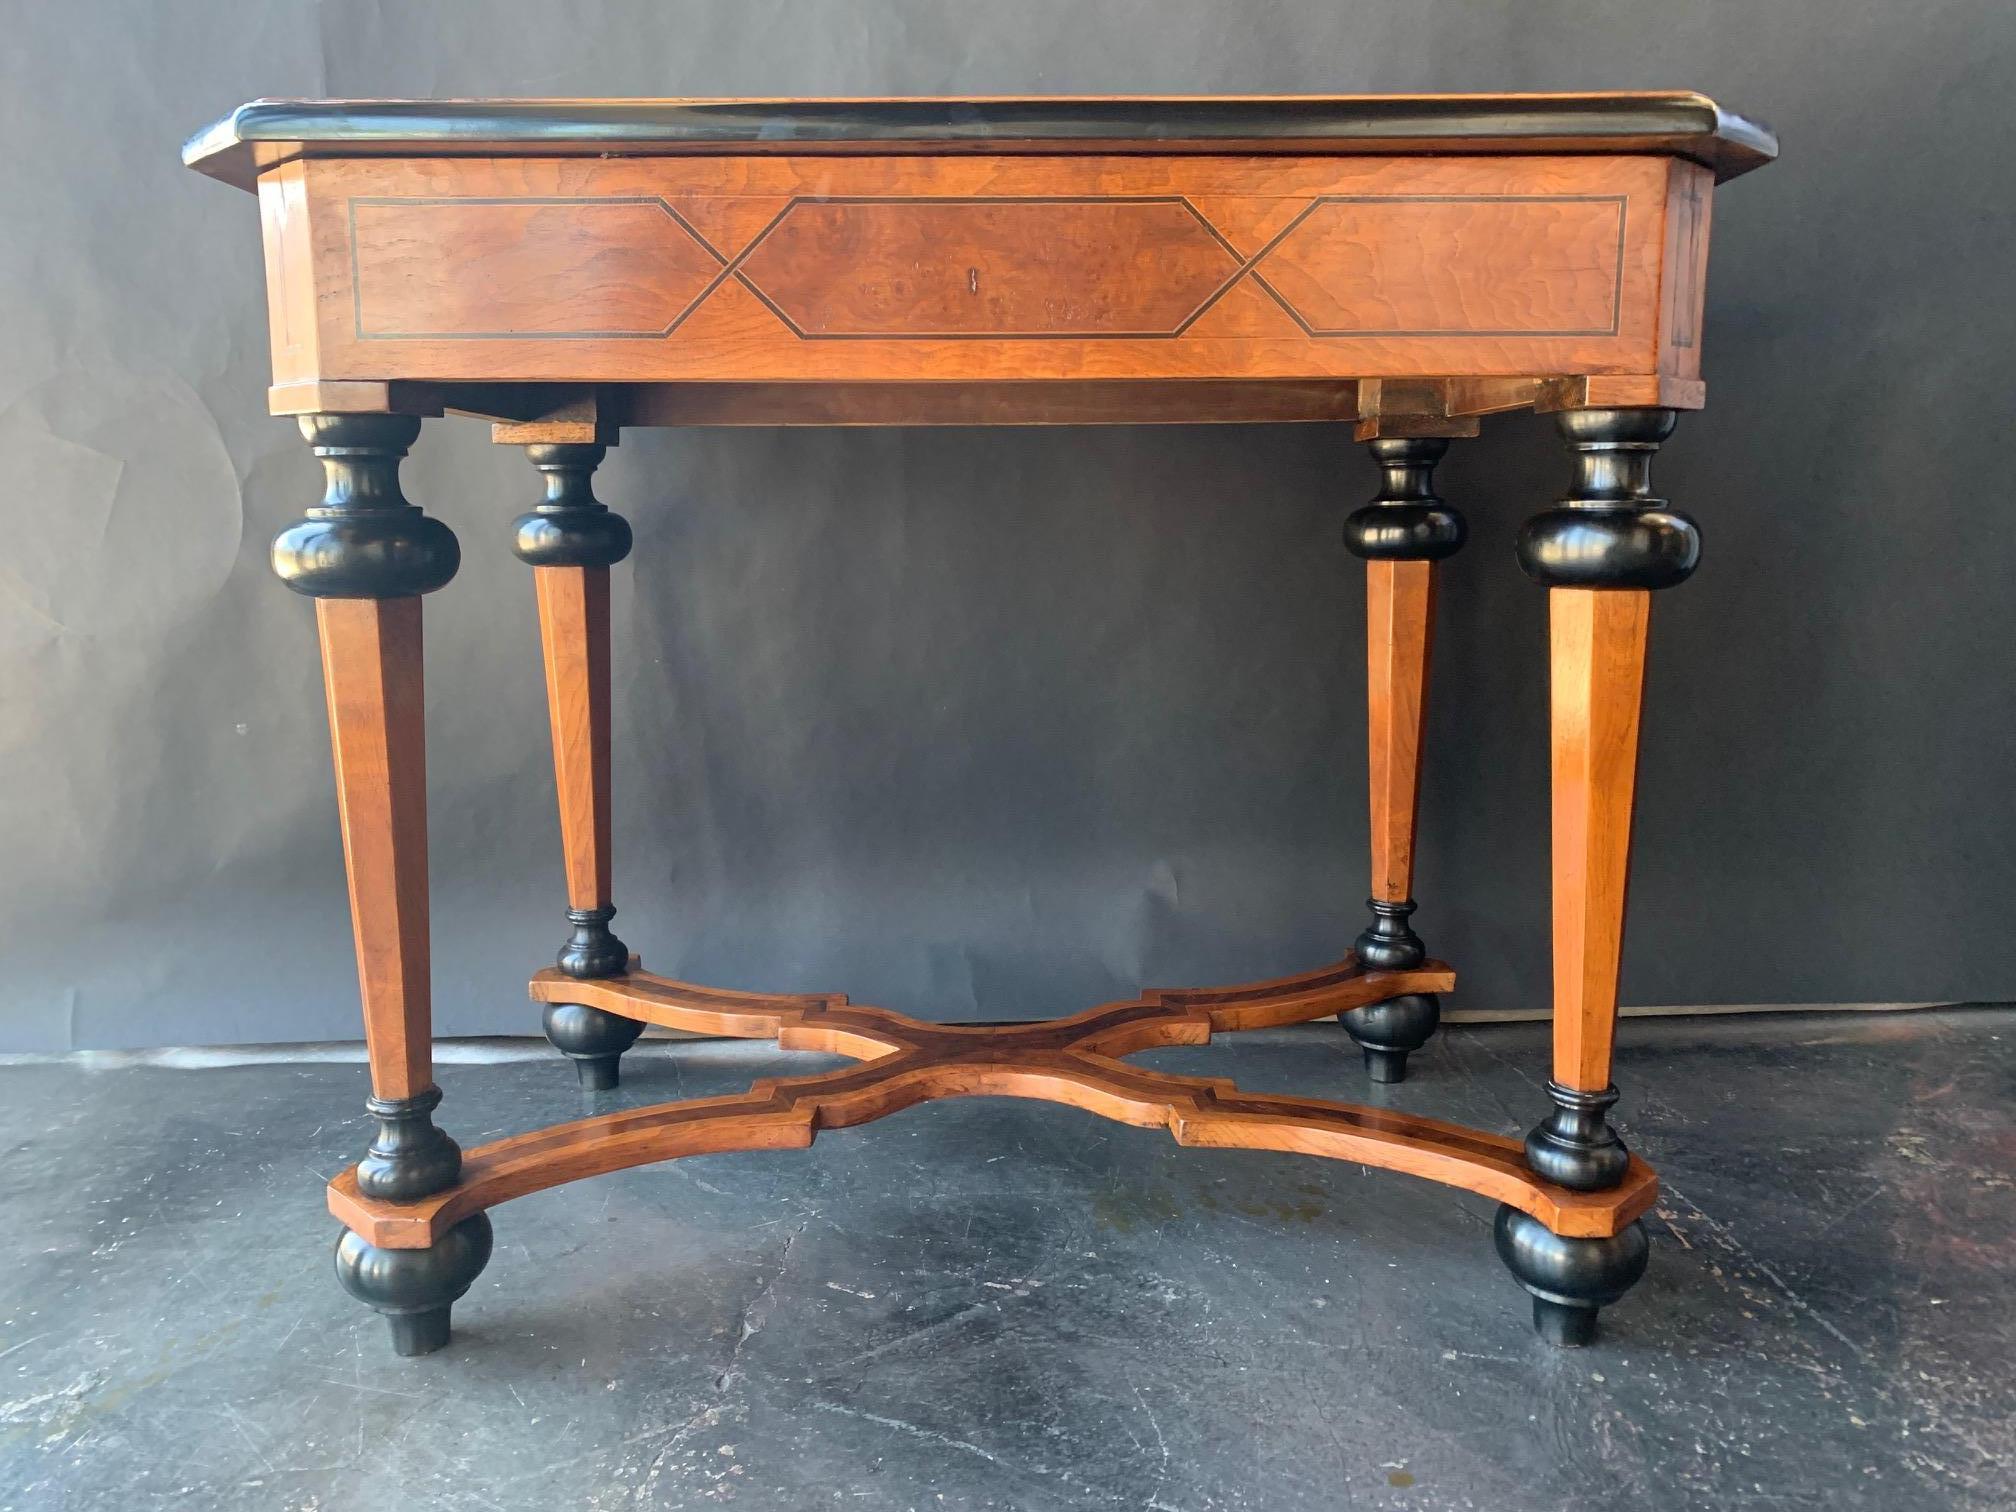 Late 19th century Italian parquetry table, newly refinished, Italy.